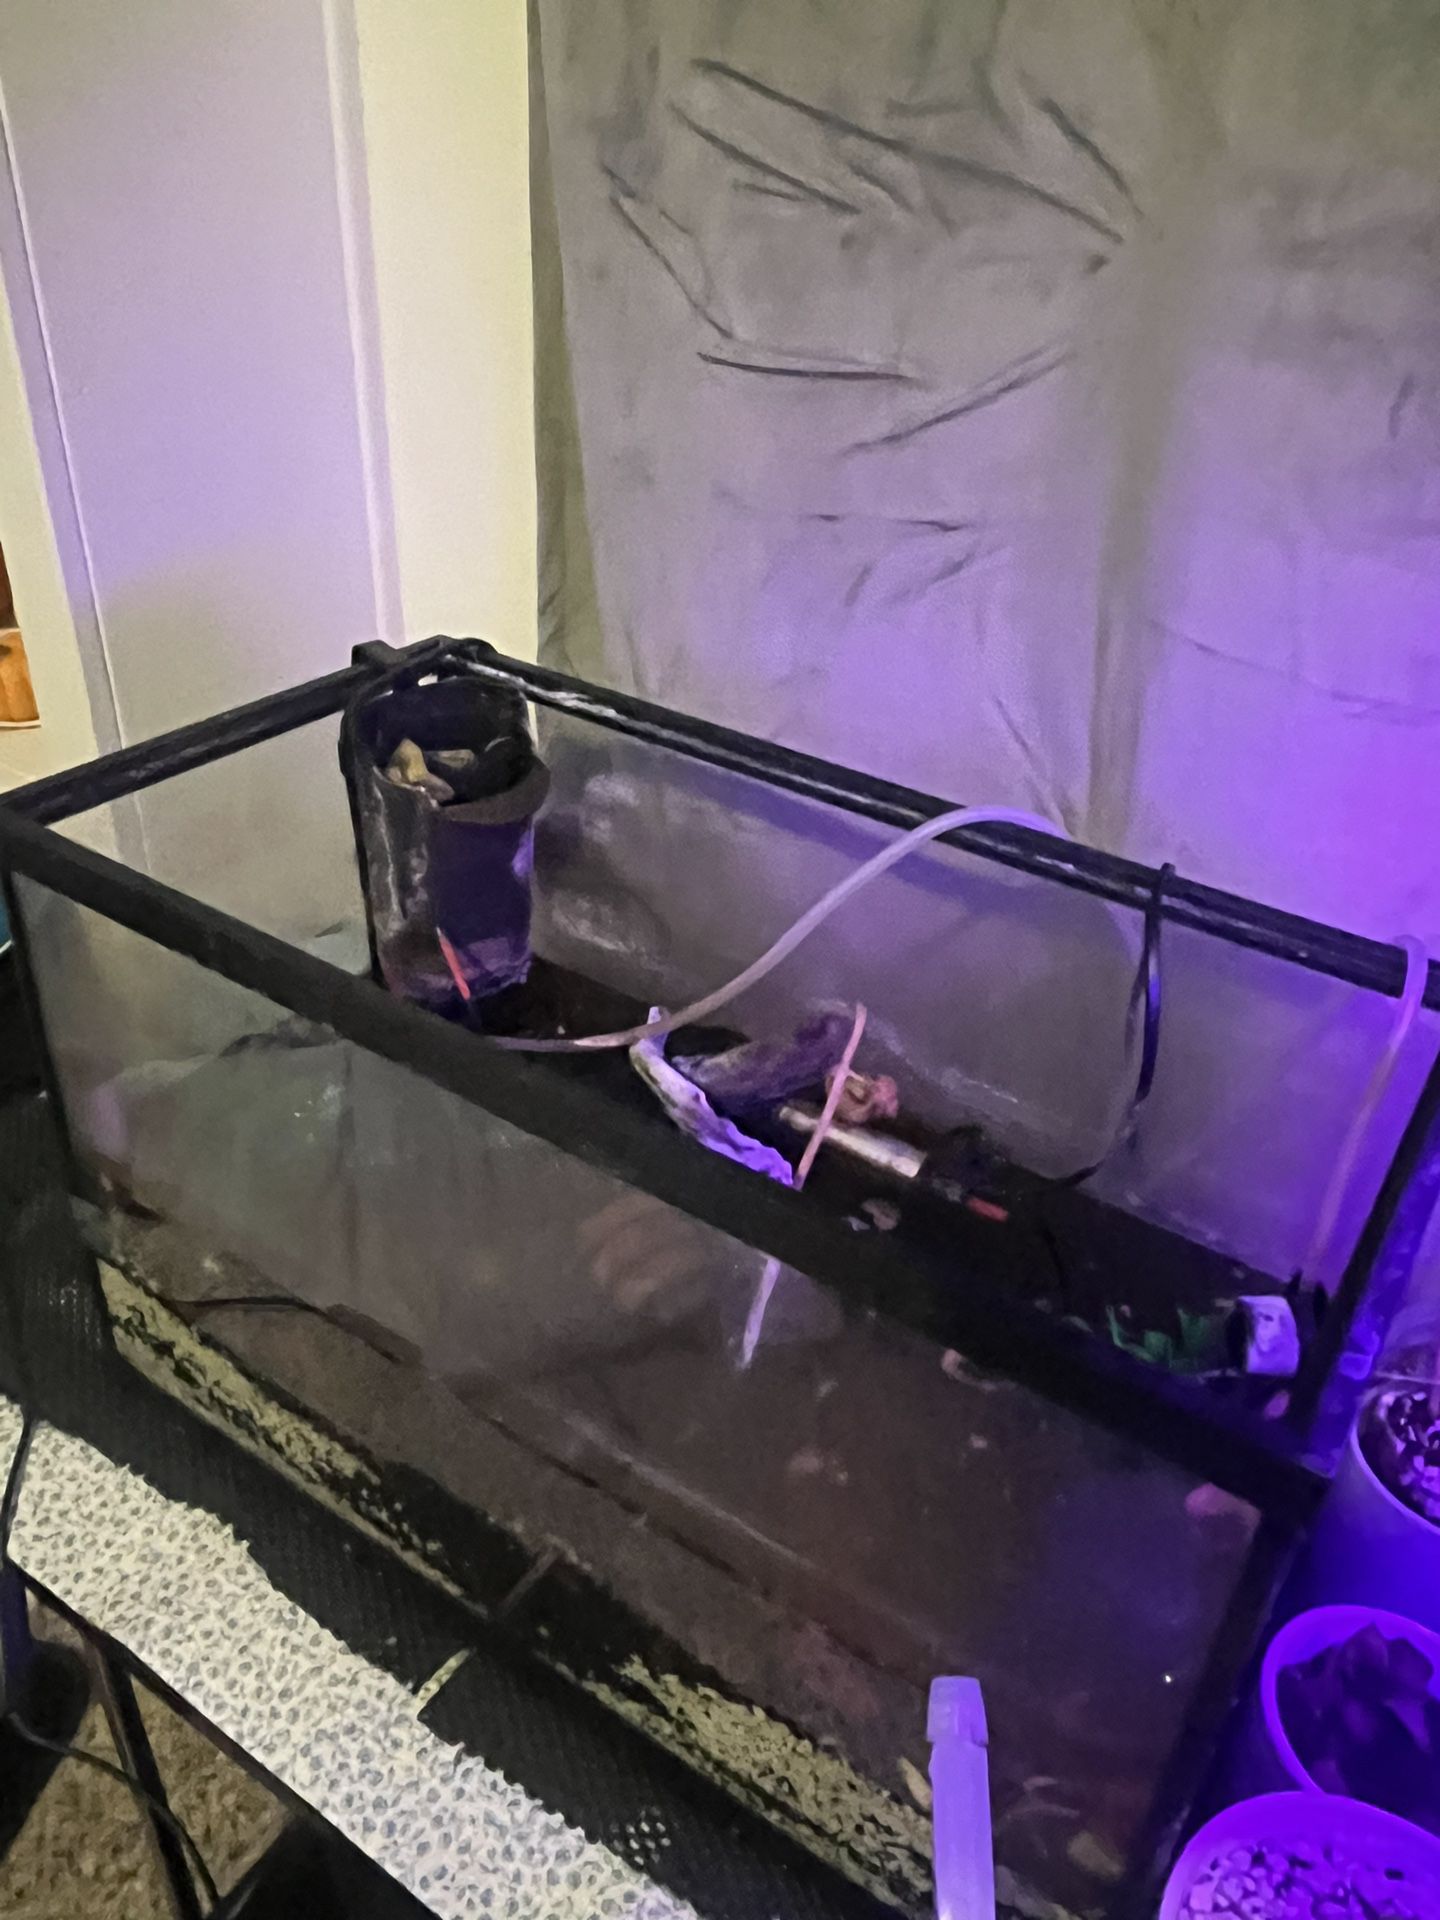 10 Gallon For Sale And Everything That Games With It. $90